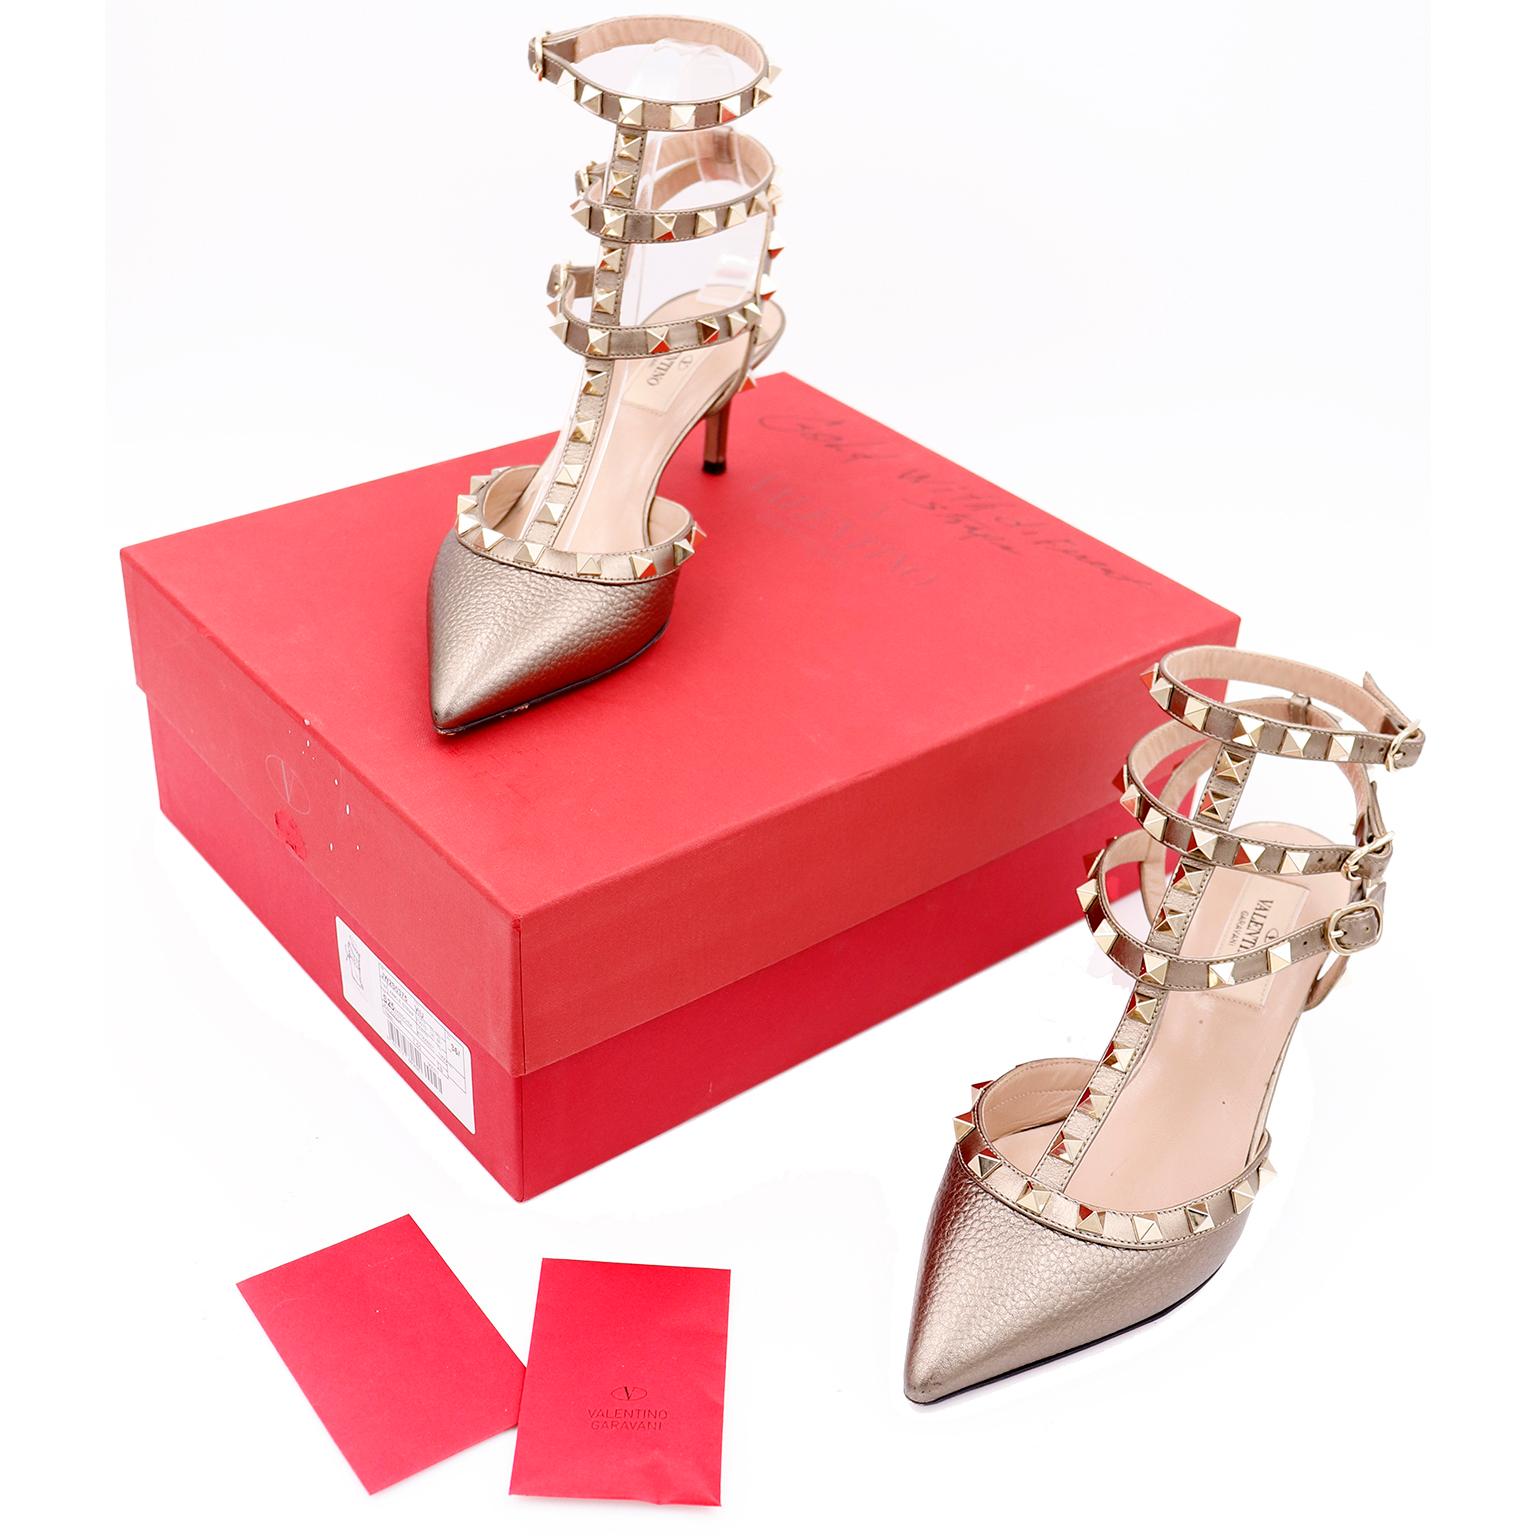 These Valentino Rockstud Heels are in a bronze pebble grain leather with gold studs. There are adjustable ankle straps with gold hardware and the shoes come with
their original box with two replacement rockstuds and the original care instruction